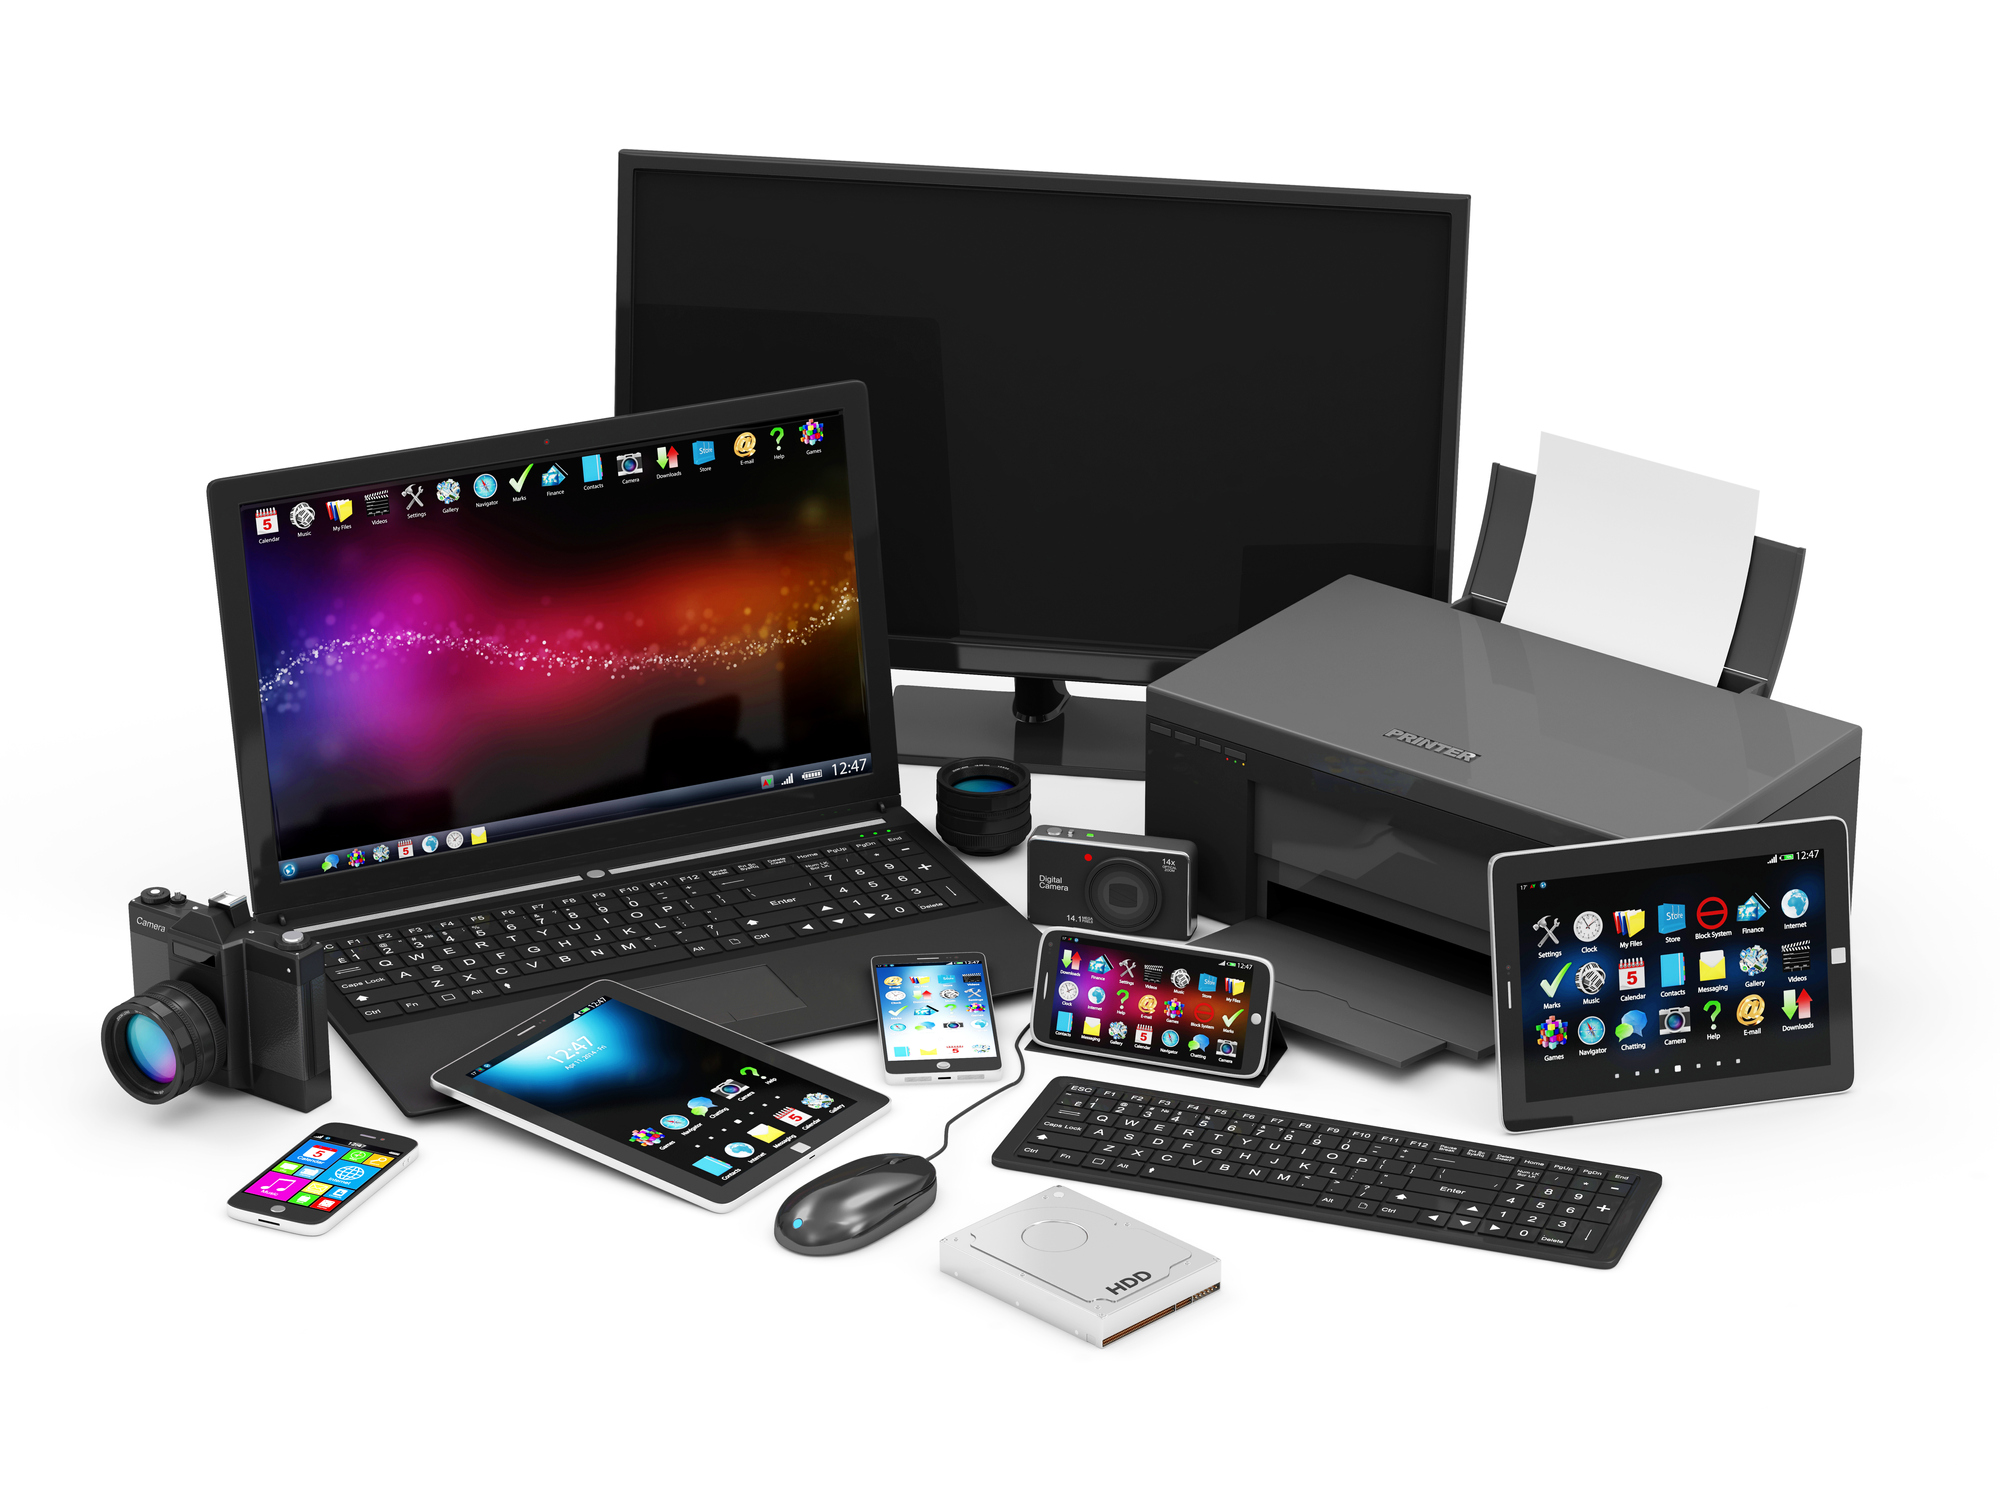 Group of Office Equipment. Laptop, Monitor, Tablet PC, Smart Phone, Printer, Keyboard, Camera Lens, Digital Photo Camera, Computer Mouse and Hard Disk Drive